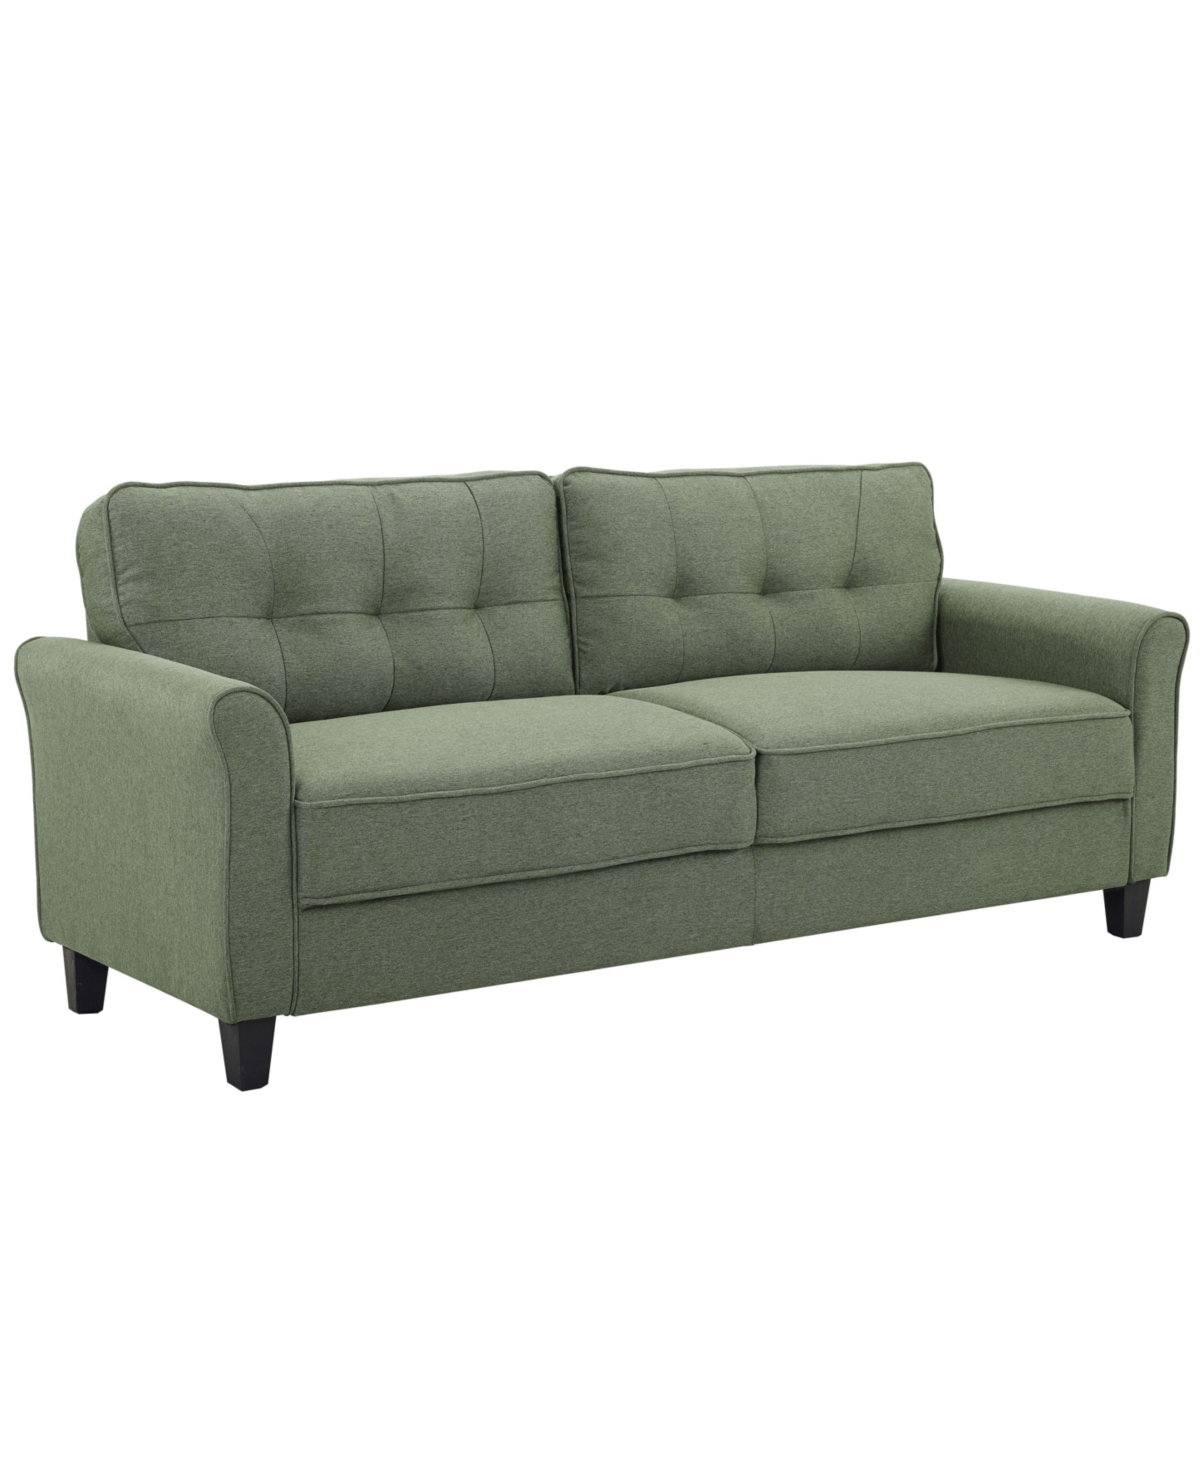 Lifestyle Solutions Hali Sofa In Green